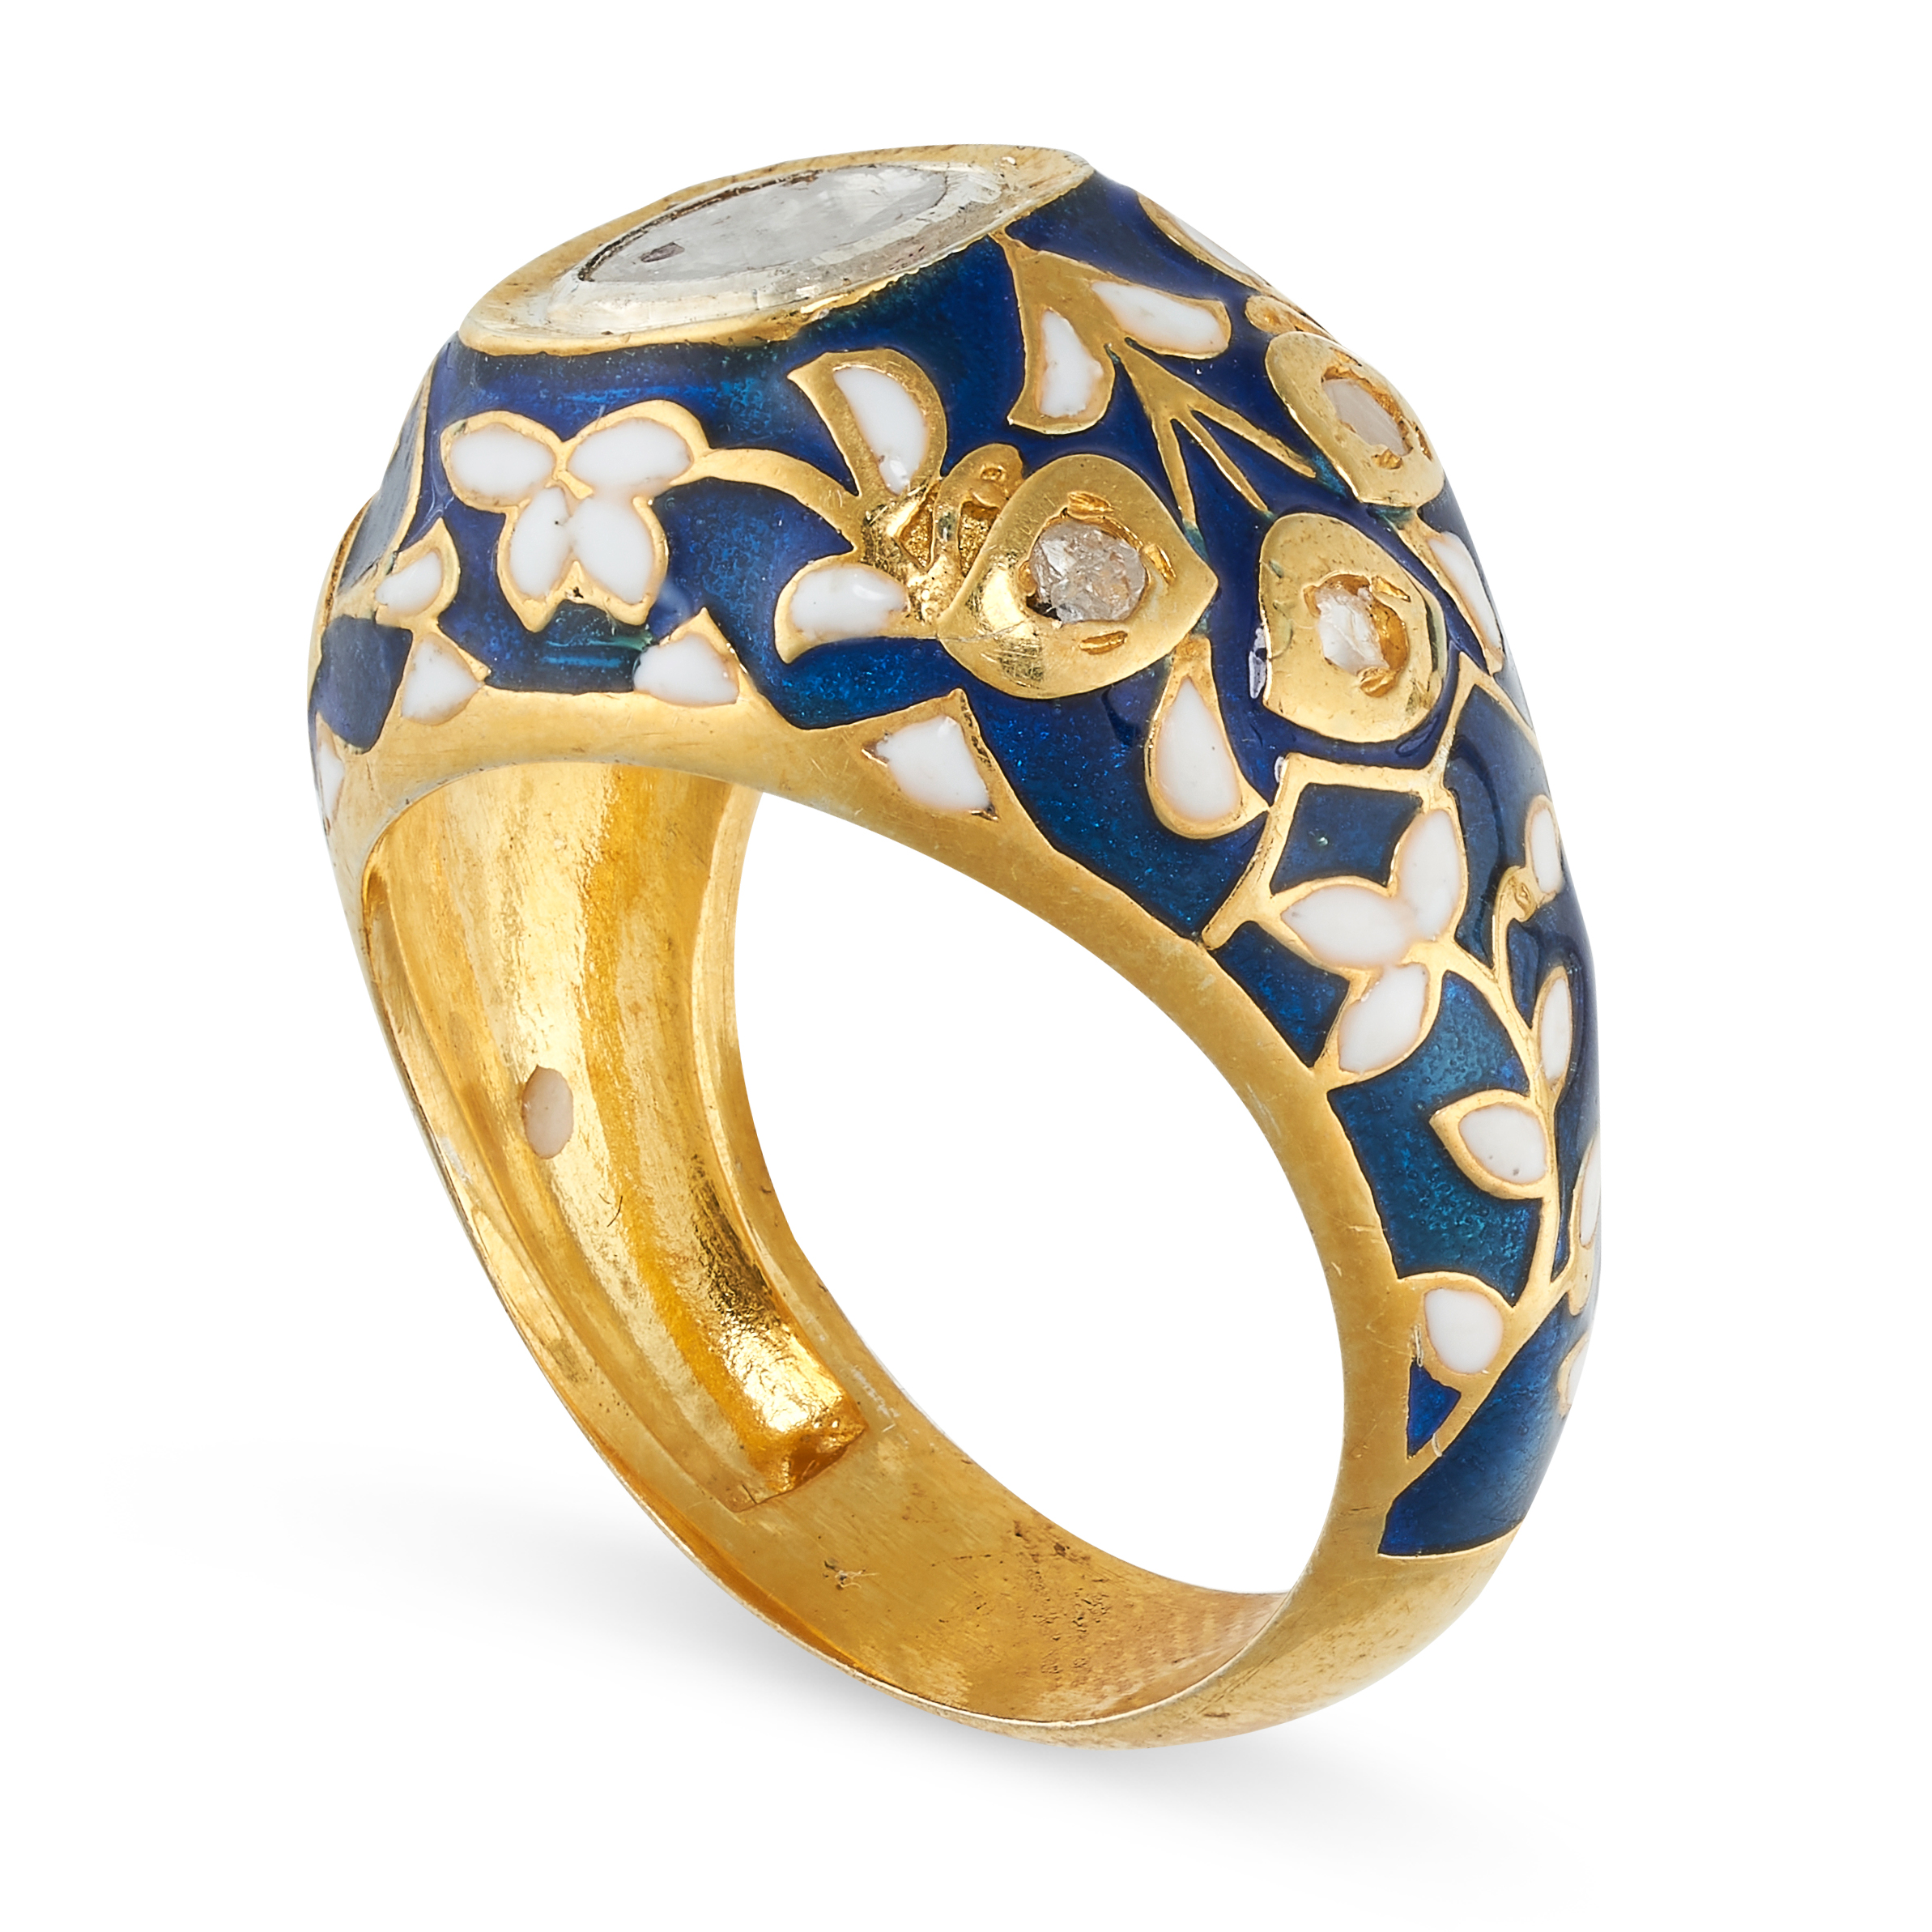 A DIAMOND AND ENAMEL RING set with a flat cut diamond in a border of blue and white enamel, accented - Image 2 of 2